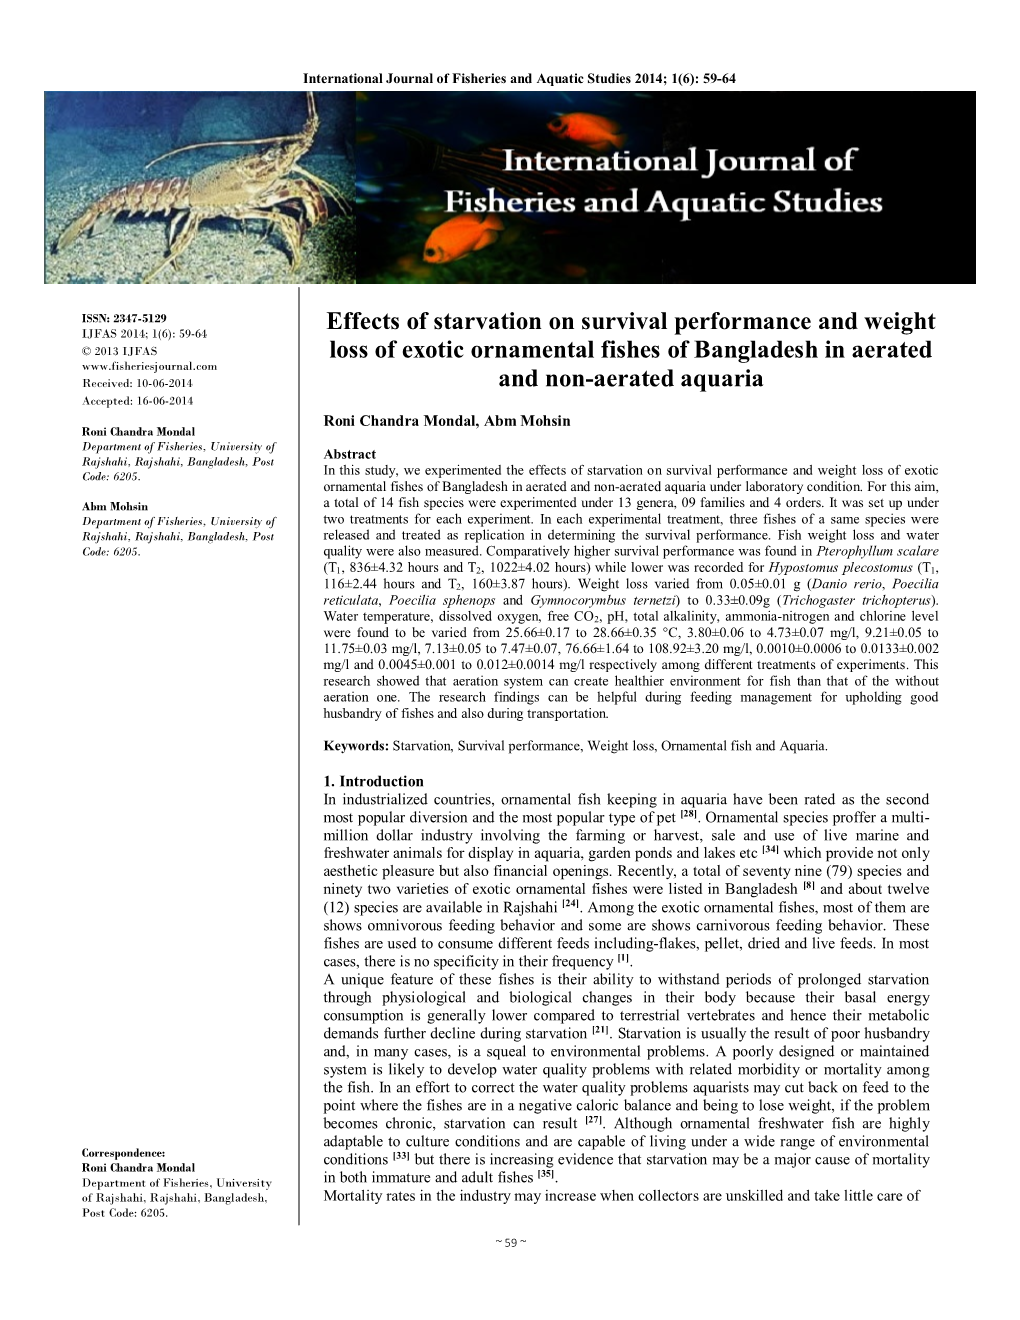 Effects of Starvation on Survival Performance and Weight Loss of Exotic Ornamental Fishes of Bangladesh in Aerated and Non-Aerated Aquaria Under Laboratory Condition